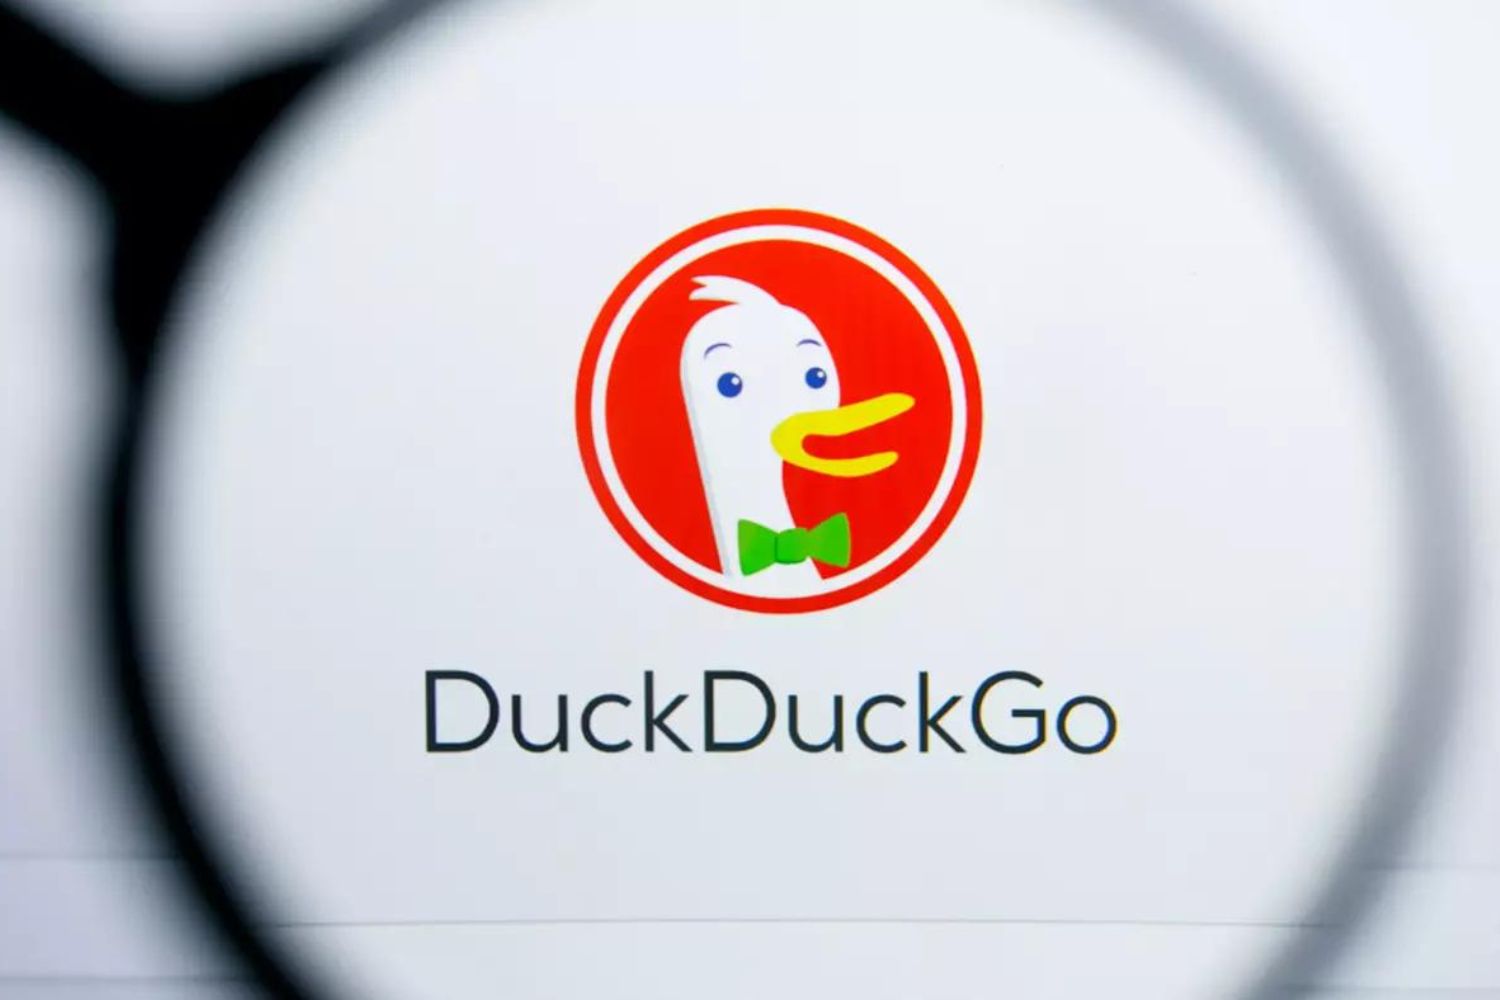 How To Make DuckDuckGo My Default Search Engine In Firefox